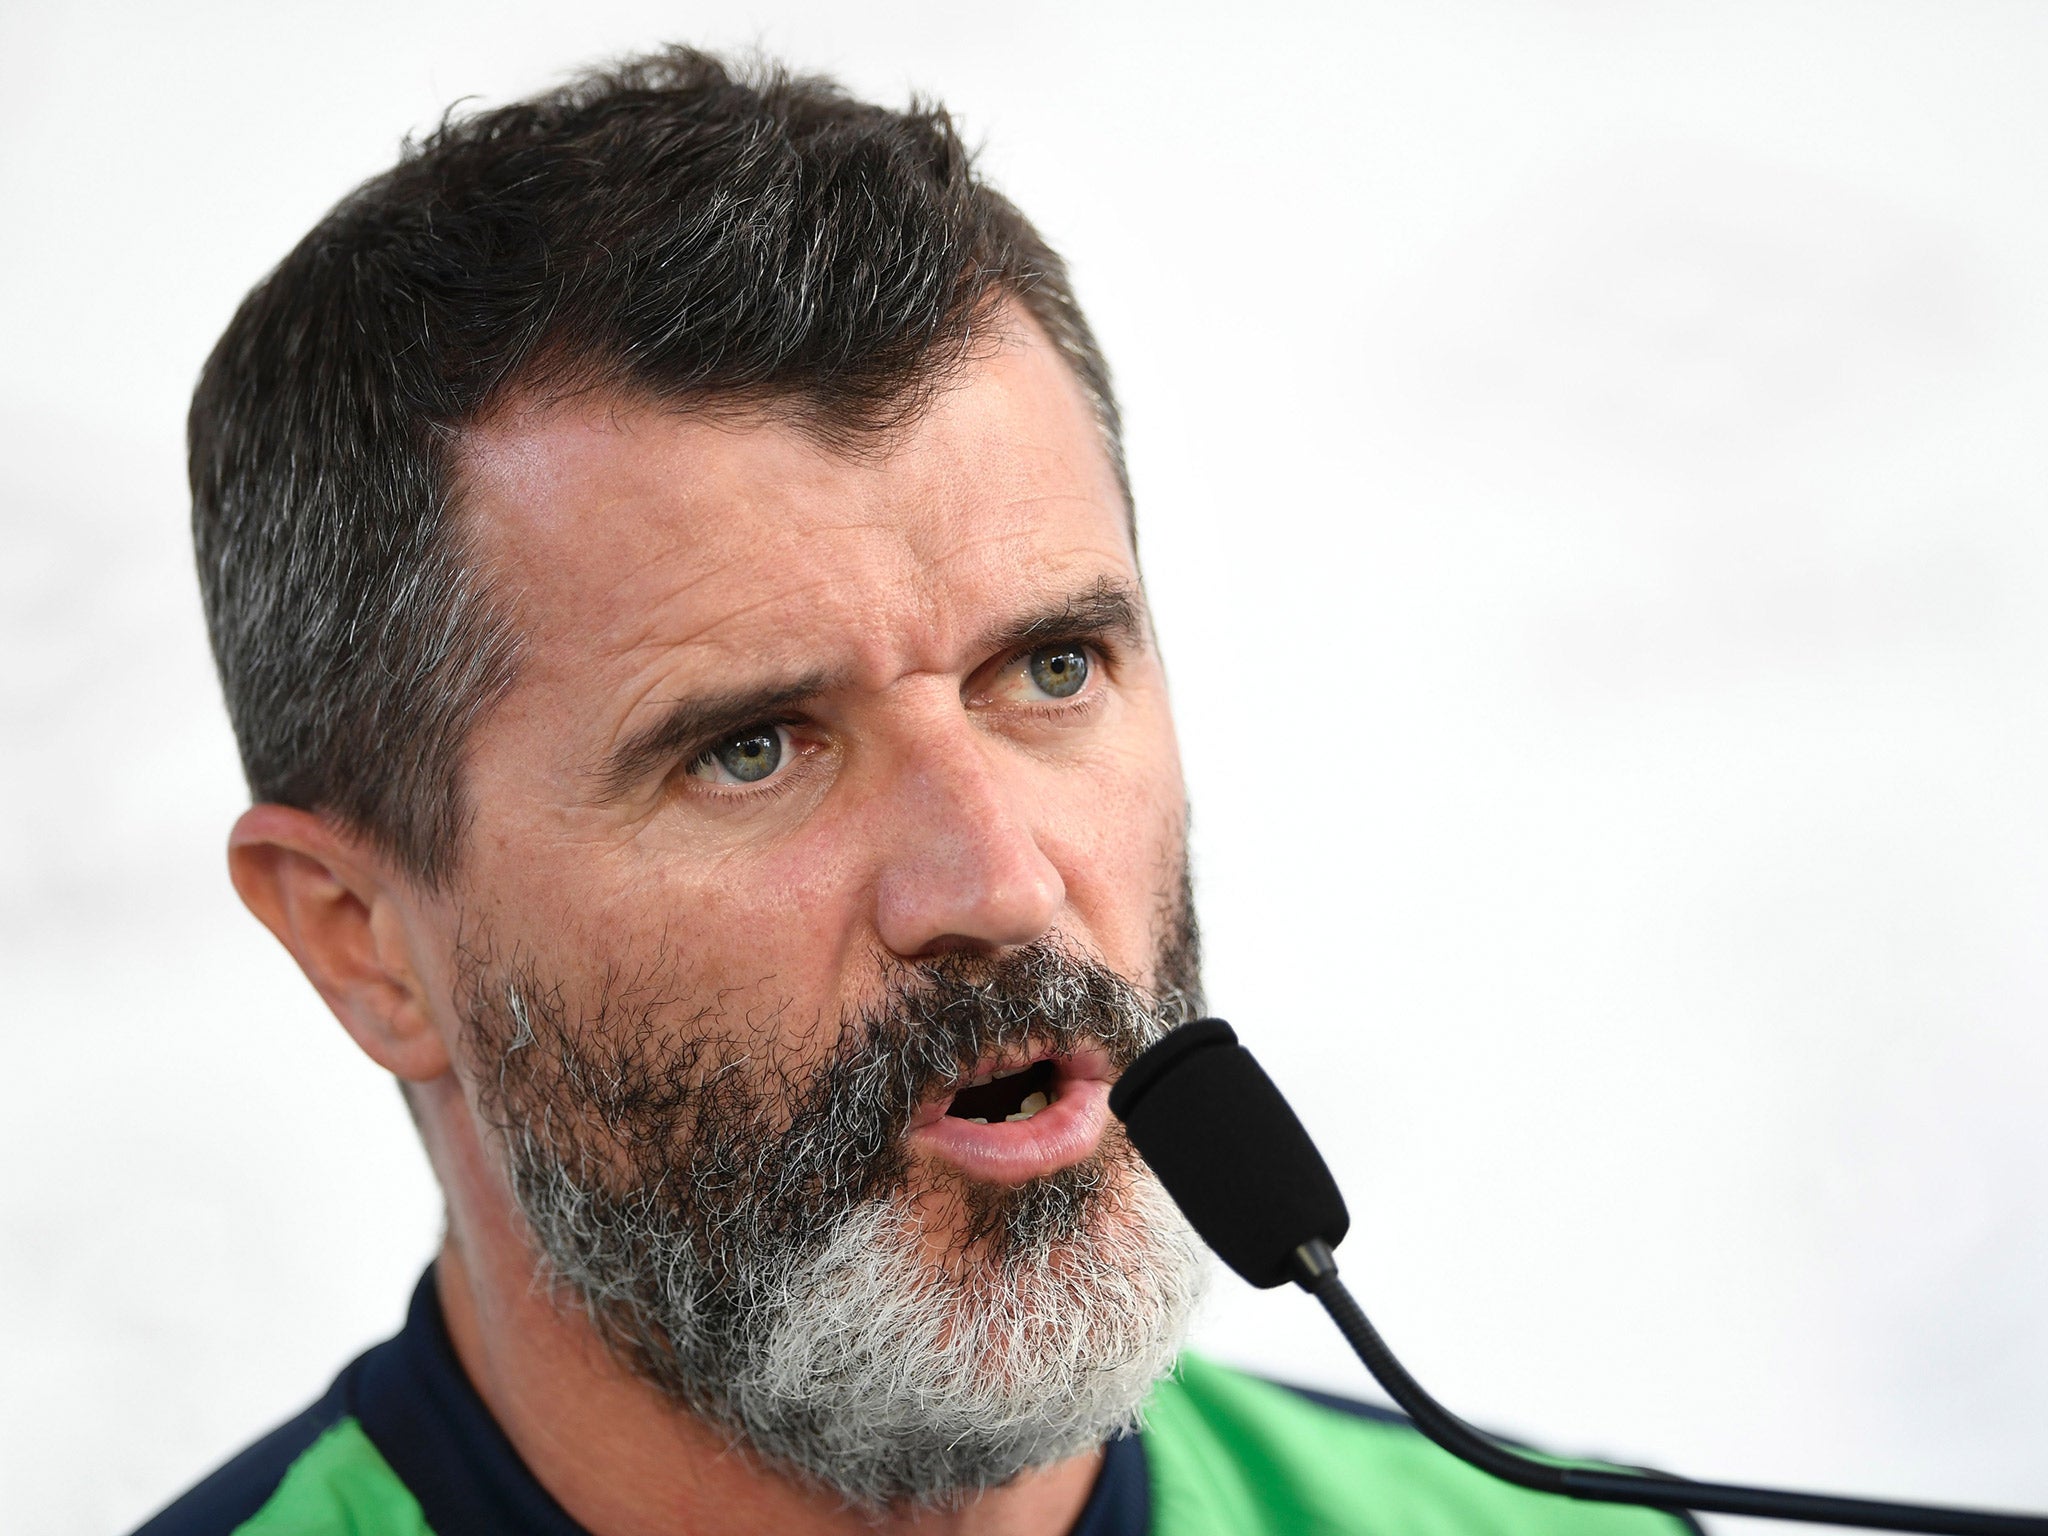 Roy Keane has reignited his feud with Arsenal fans over the form of Theo Walcott